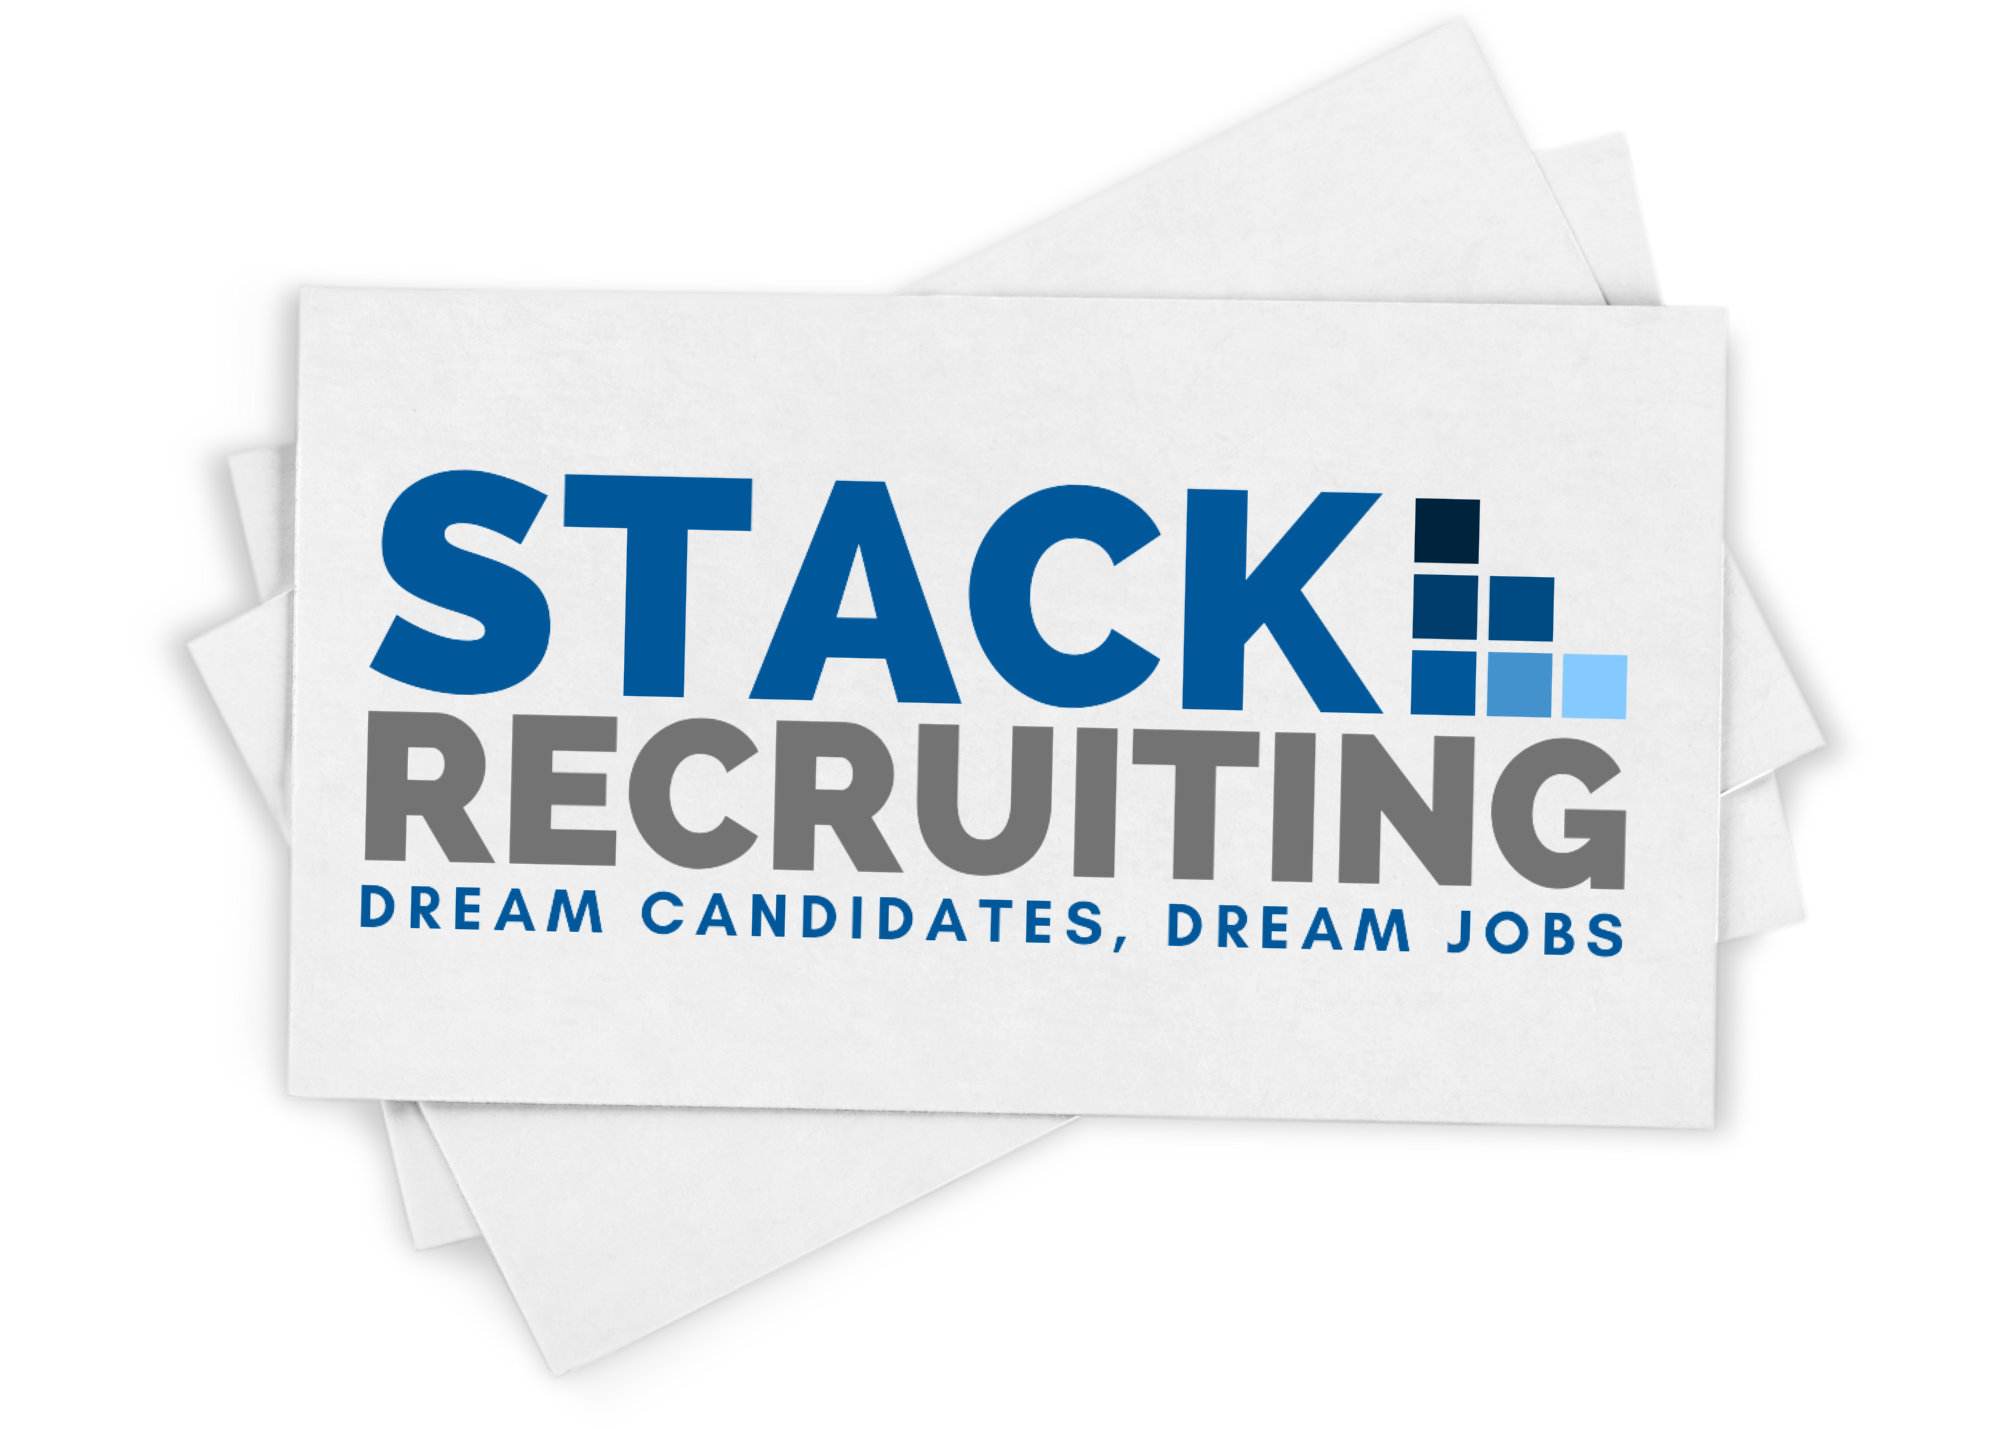 Stack Recruiting